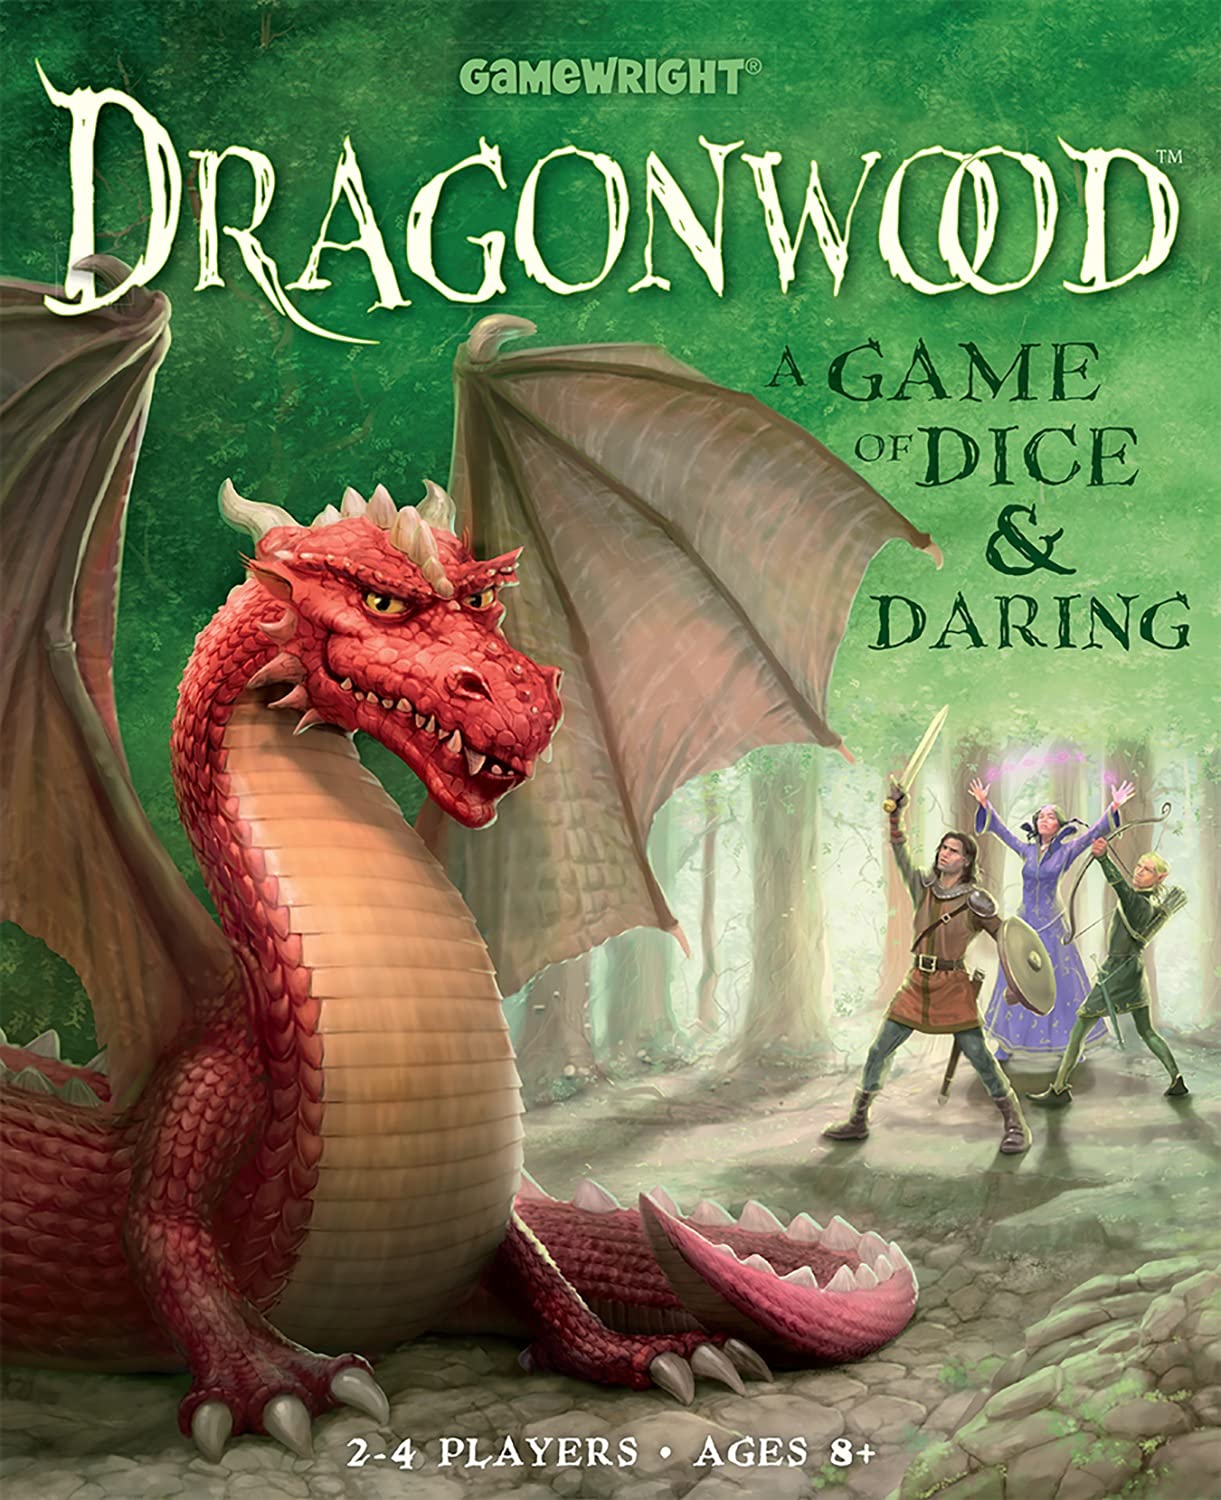 Gamewright | Dragonwood Game | Board Game | Ages 8+ | 2-4 Players | 2 Minutes Playing Time, Orange,silver,white